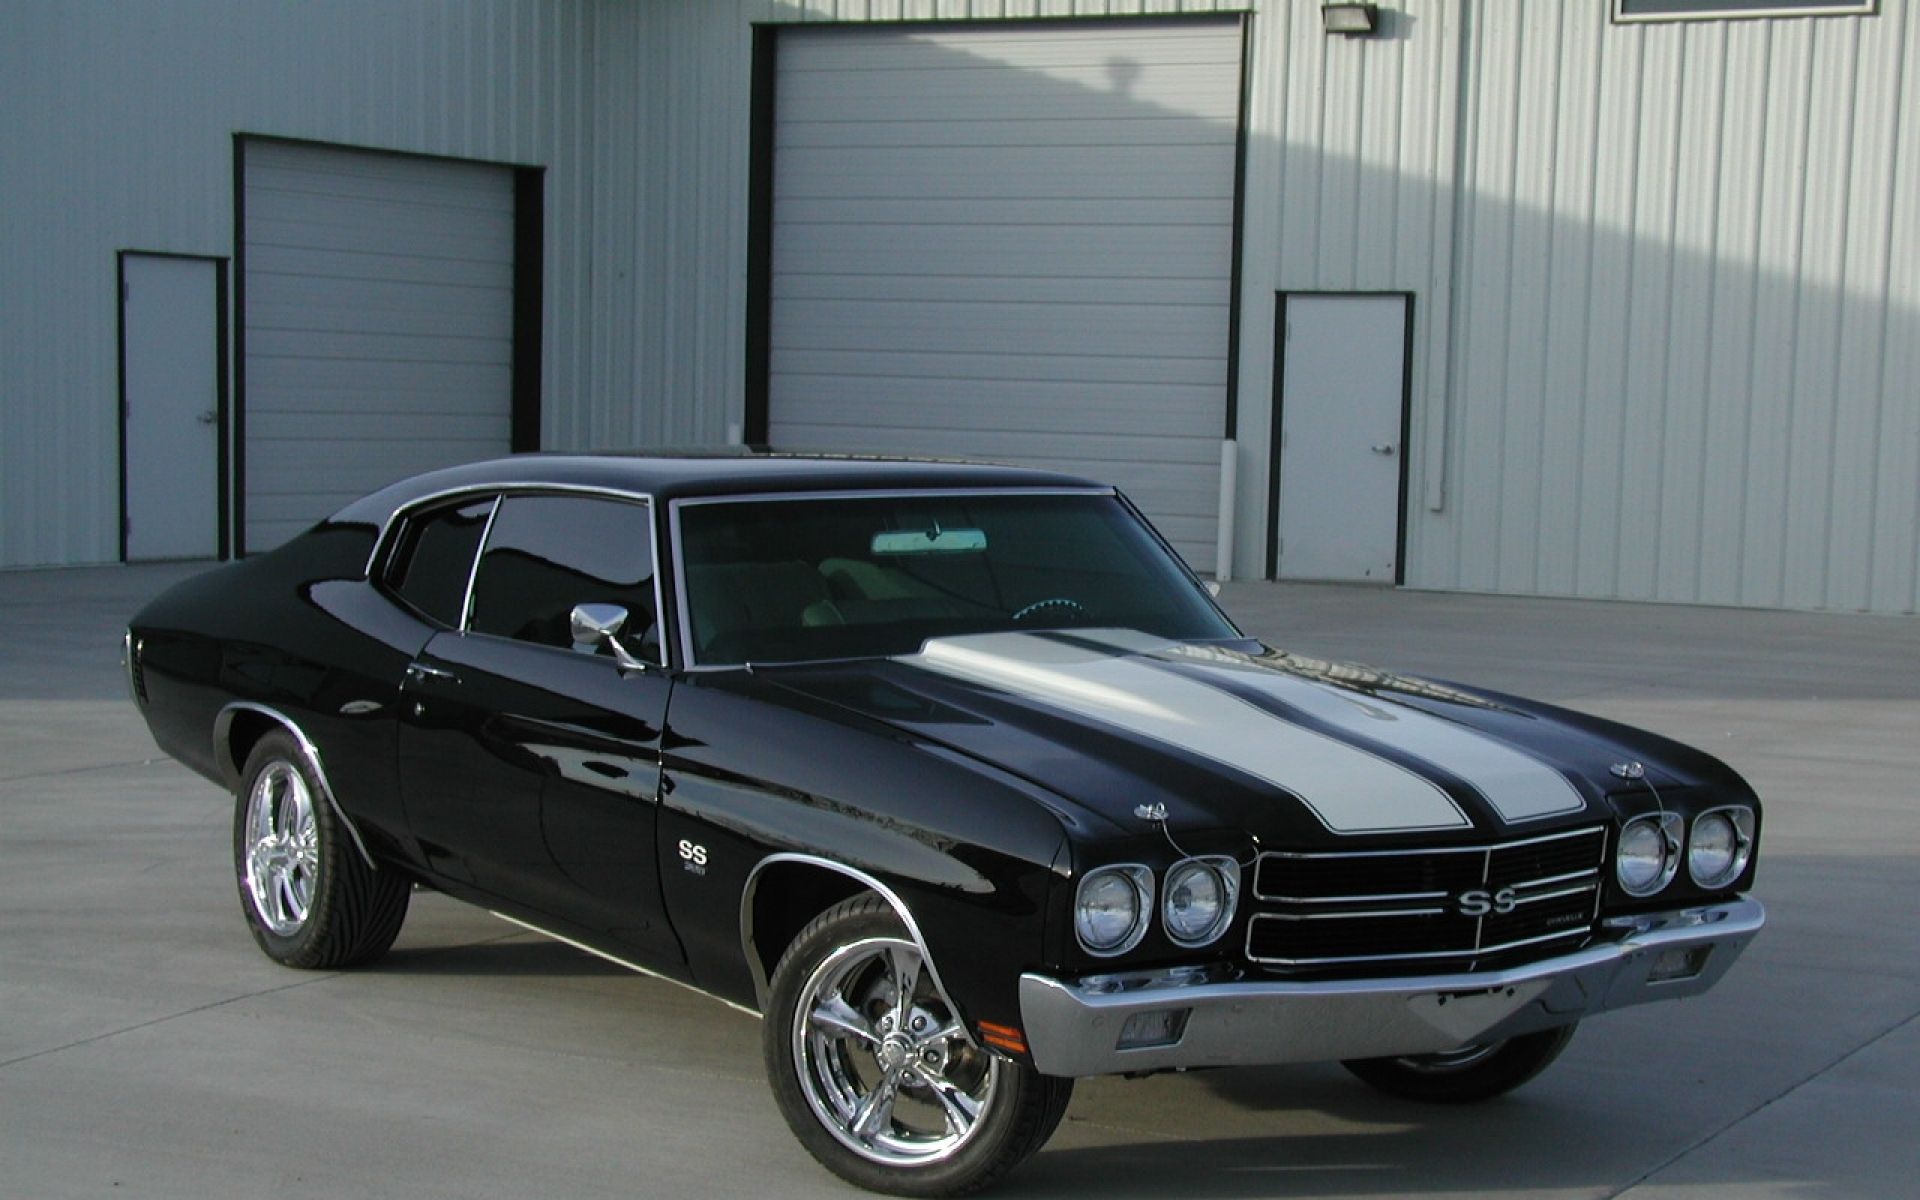 Chevrolet Chevelle SS Wallpapers HD Download 1920x1200